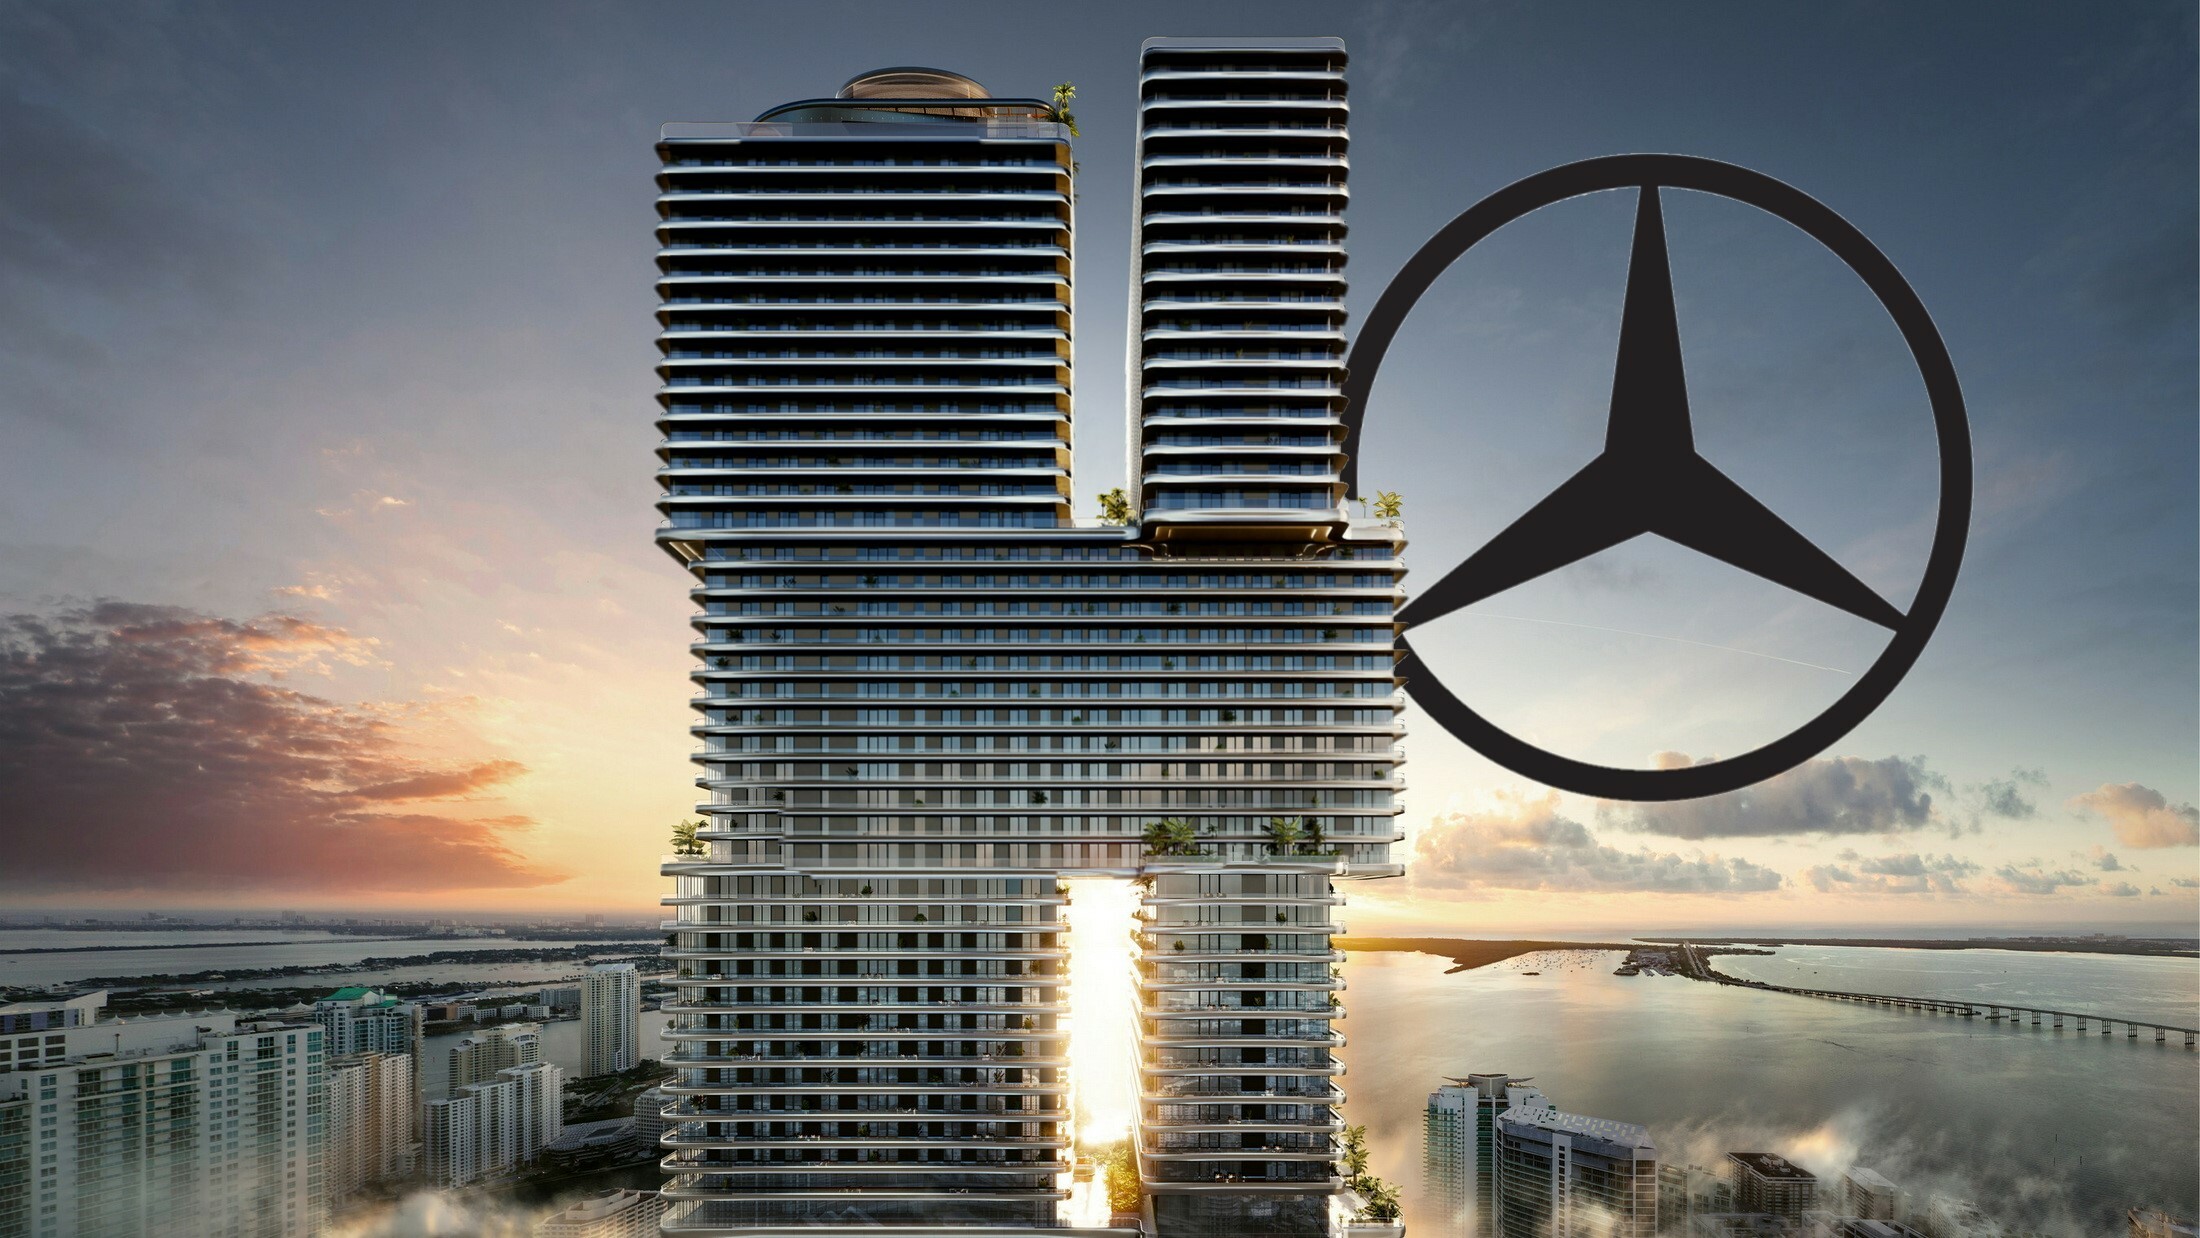 Mercedes-Benz Joins Condo Craze With 67-Story Luxury Miami Tower